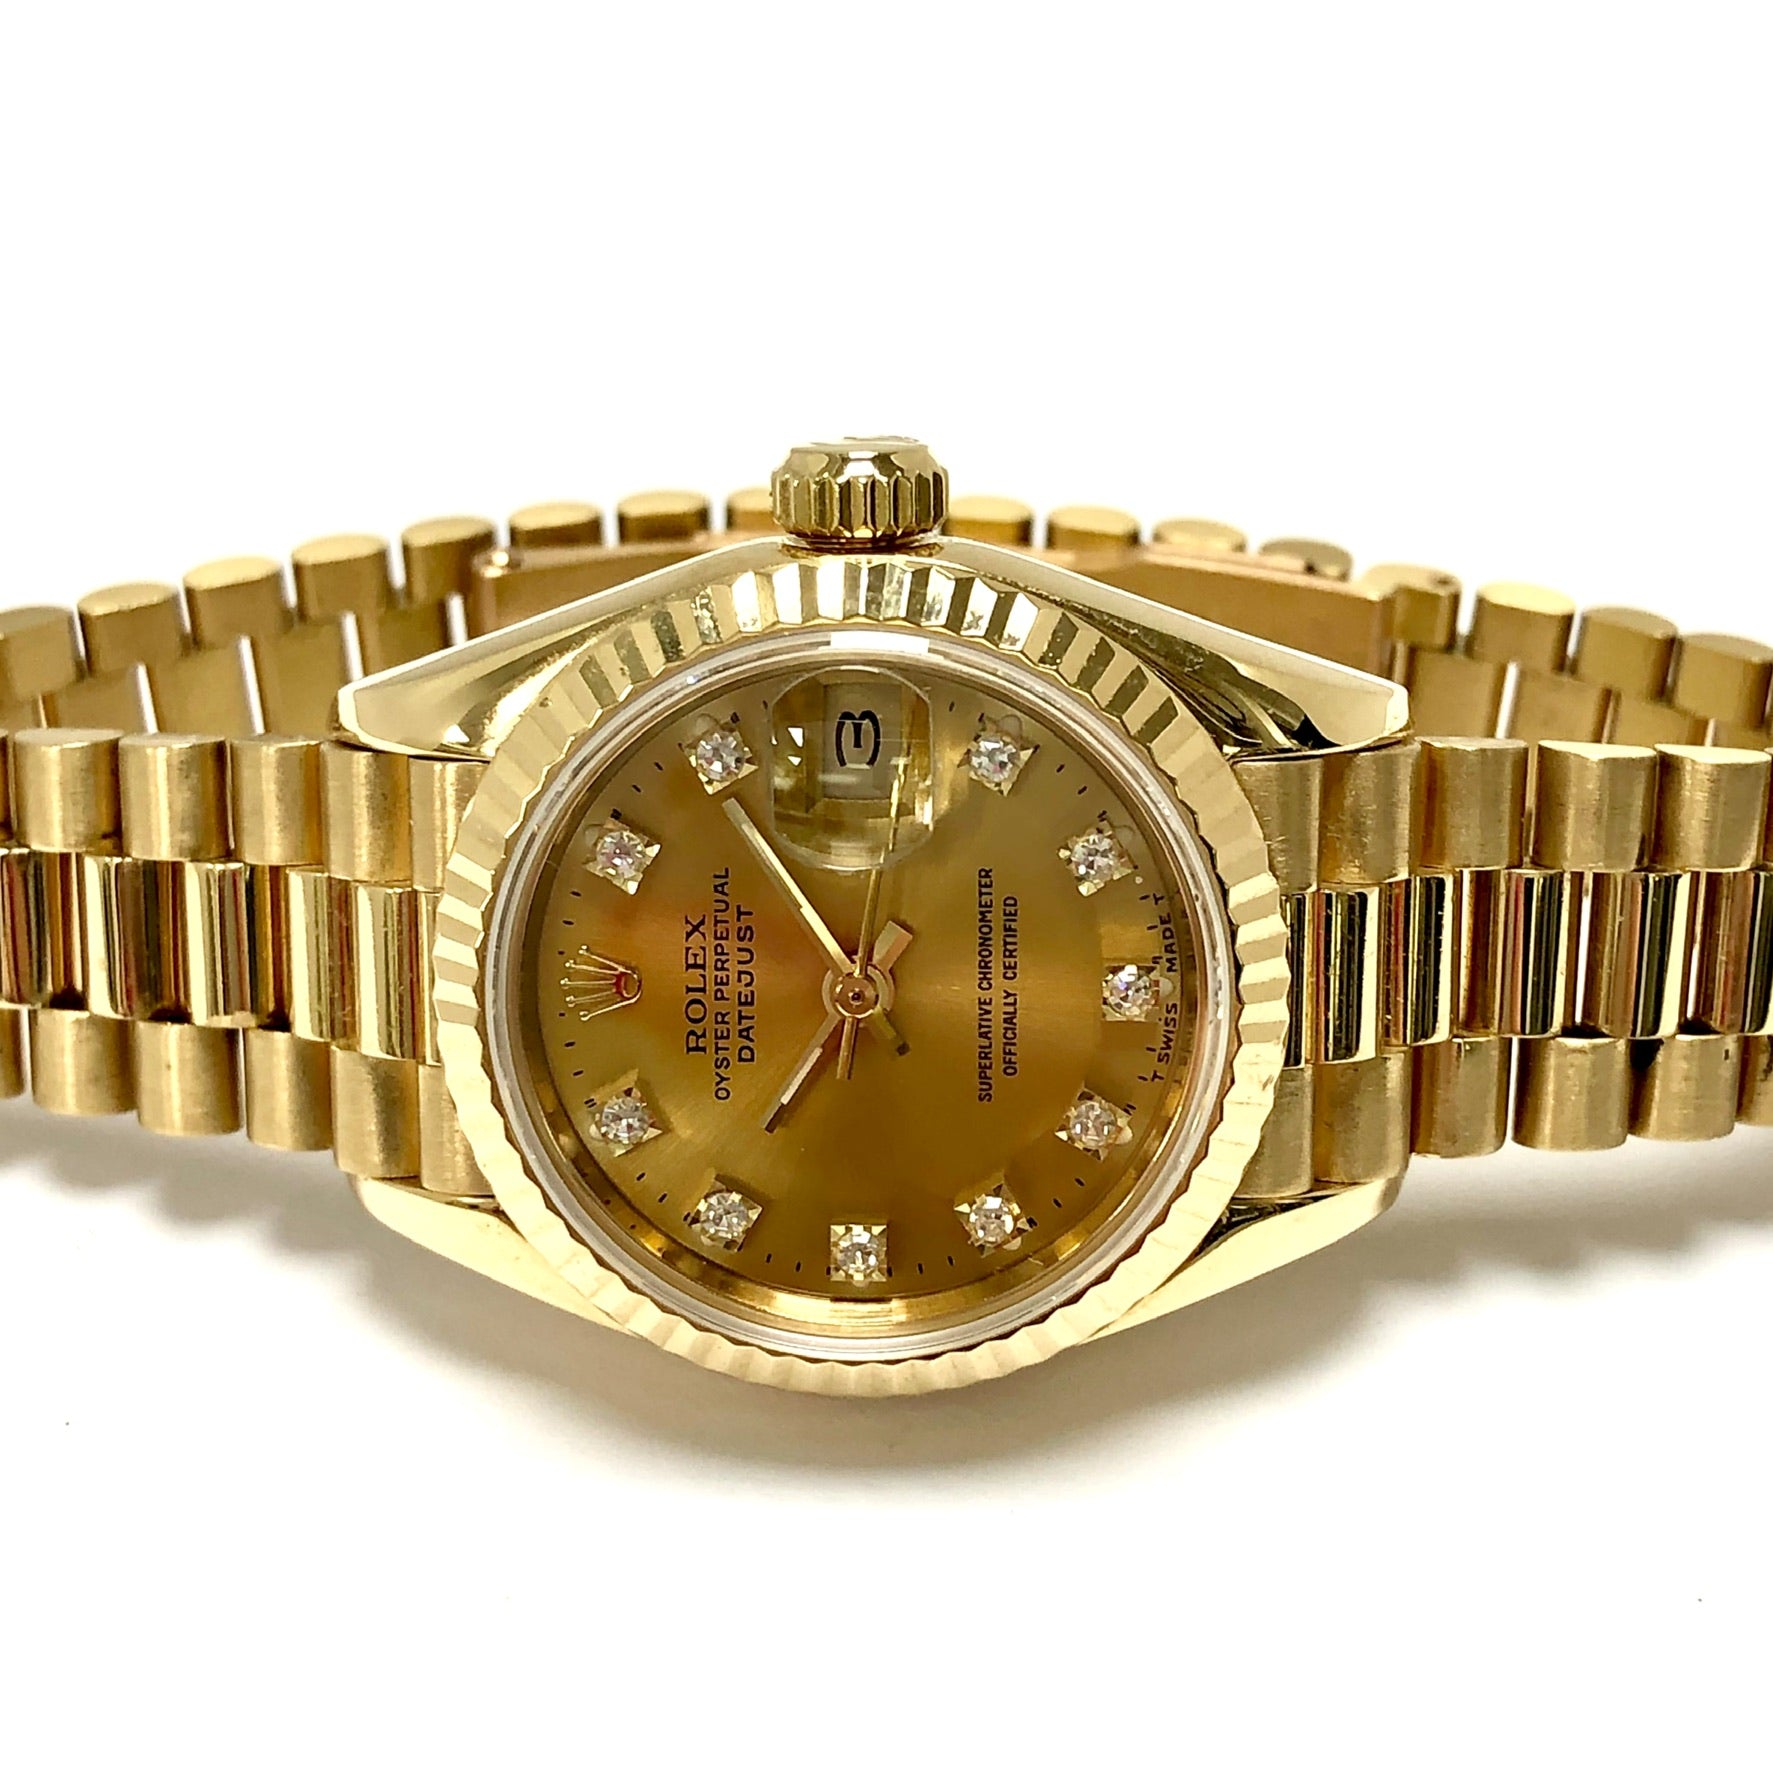 ROLEX OYSTER PERPETUAL DATEJUST 26mm 18K Gold DIAMOND Dial NATILUXIA